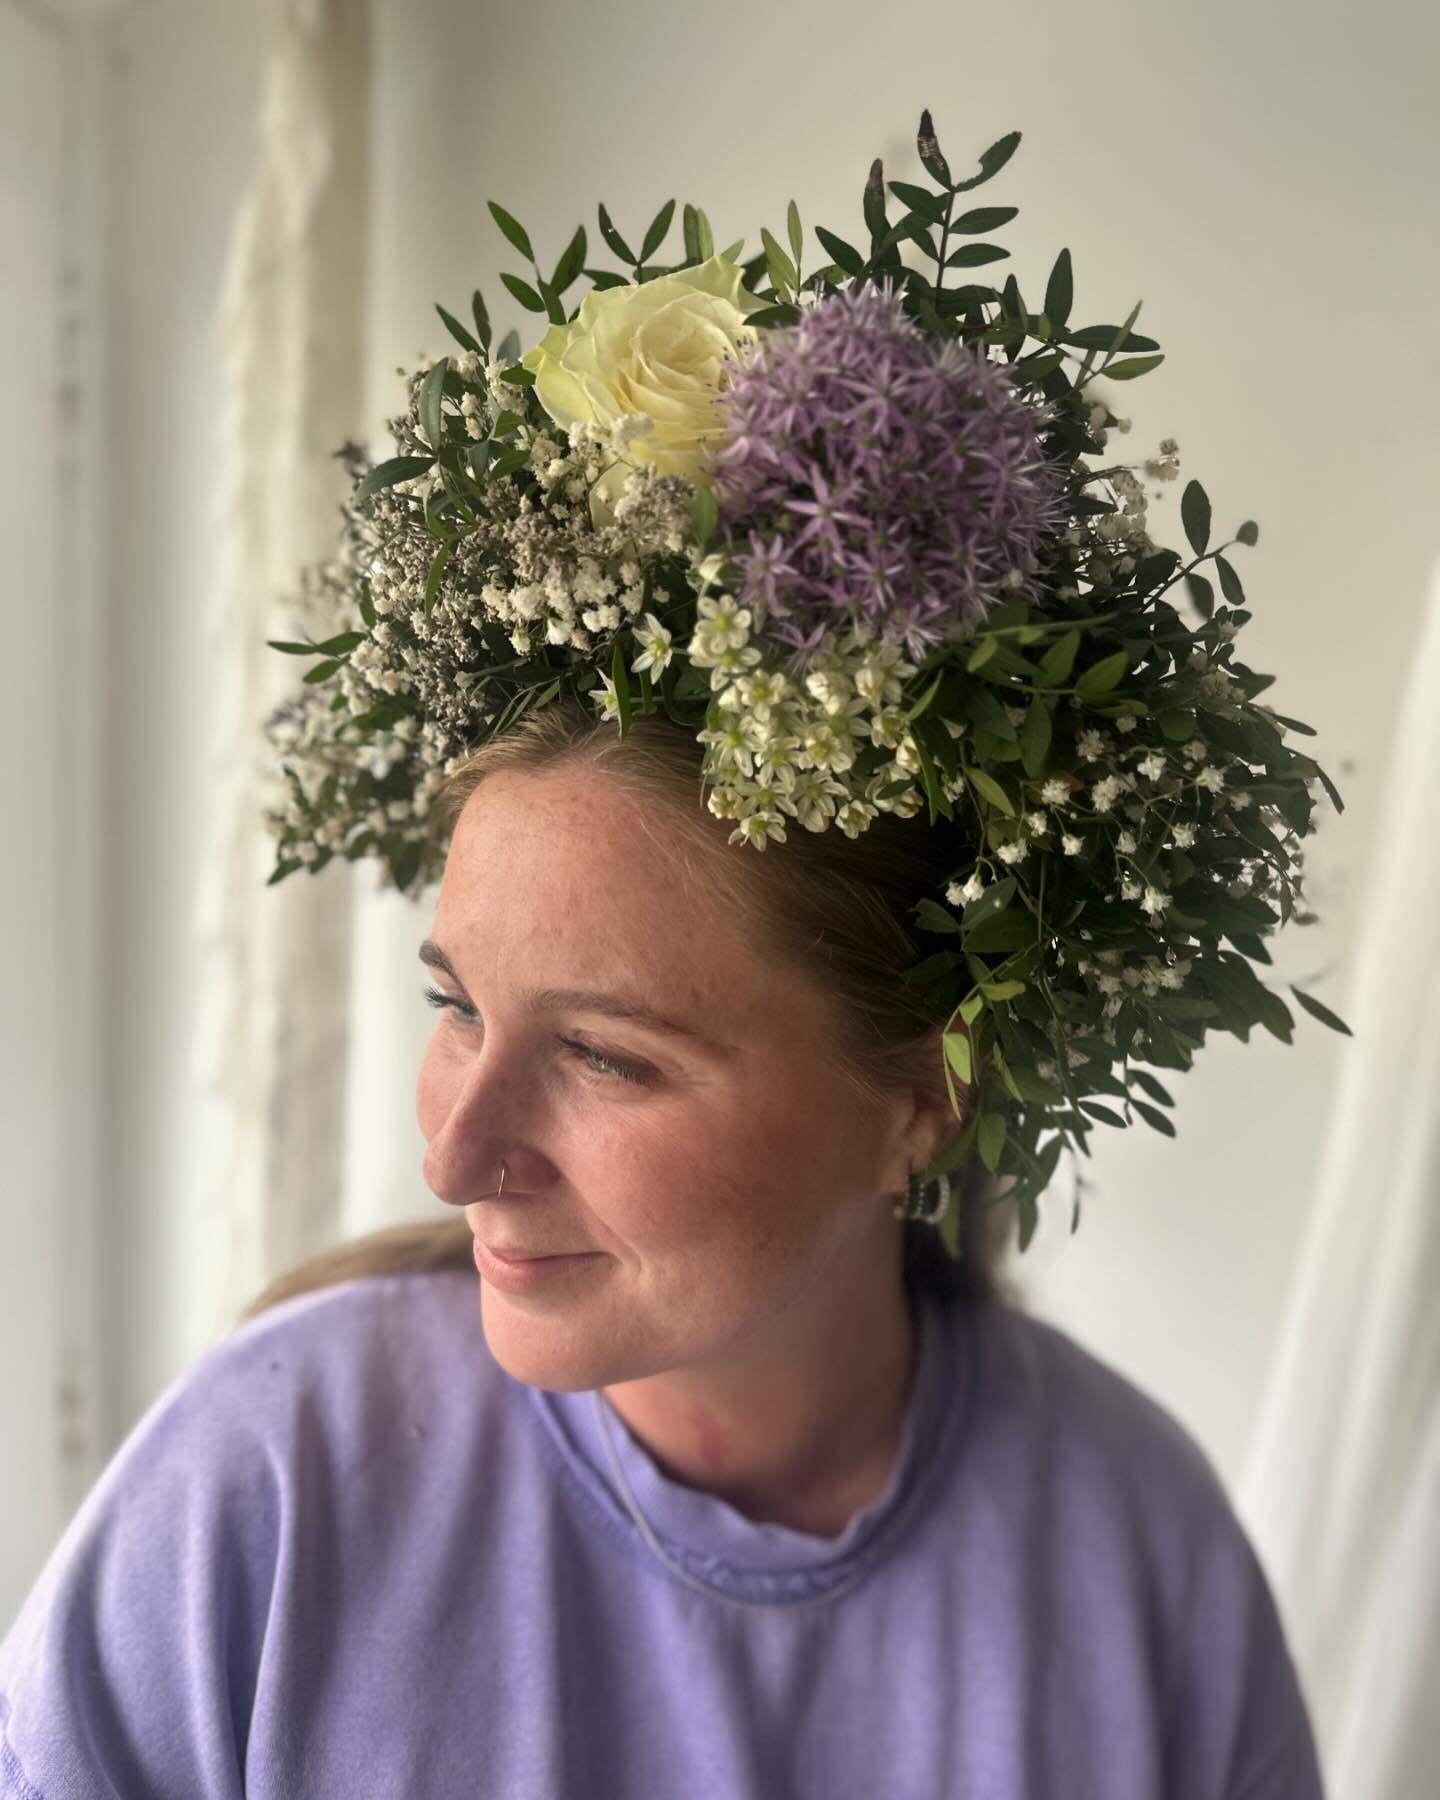 Had a lovely catch up with my girl @betty_blooming we are working on lots of exciting things together this year so we needed a creative brain storming session! 

Invited her to make up a flower crown too,
as I&rsquo;m prepping for my upcoming -

&lsq